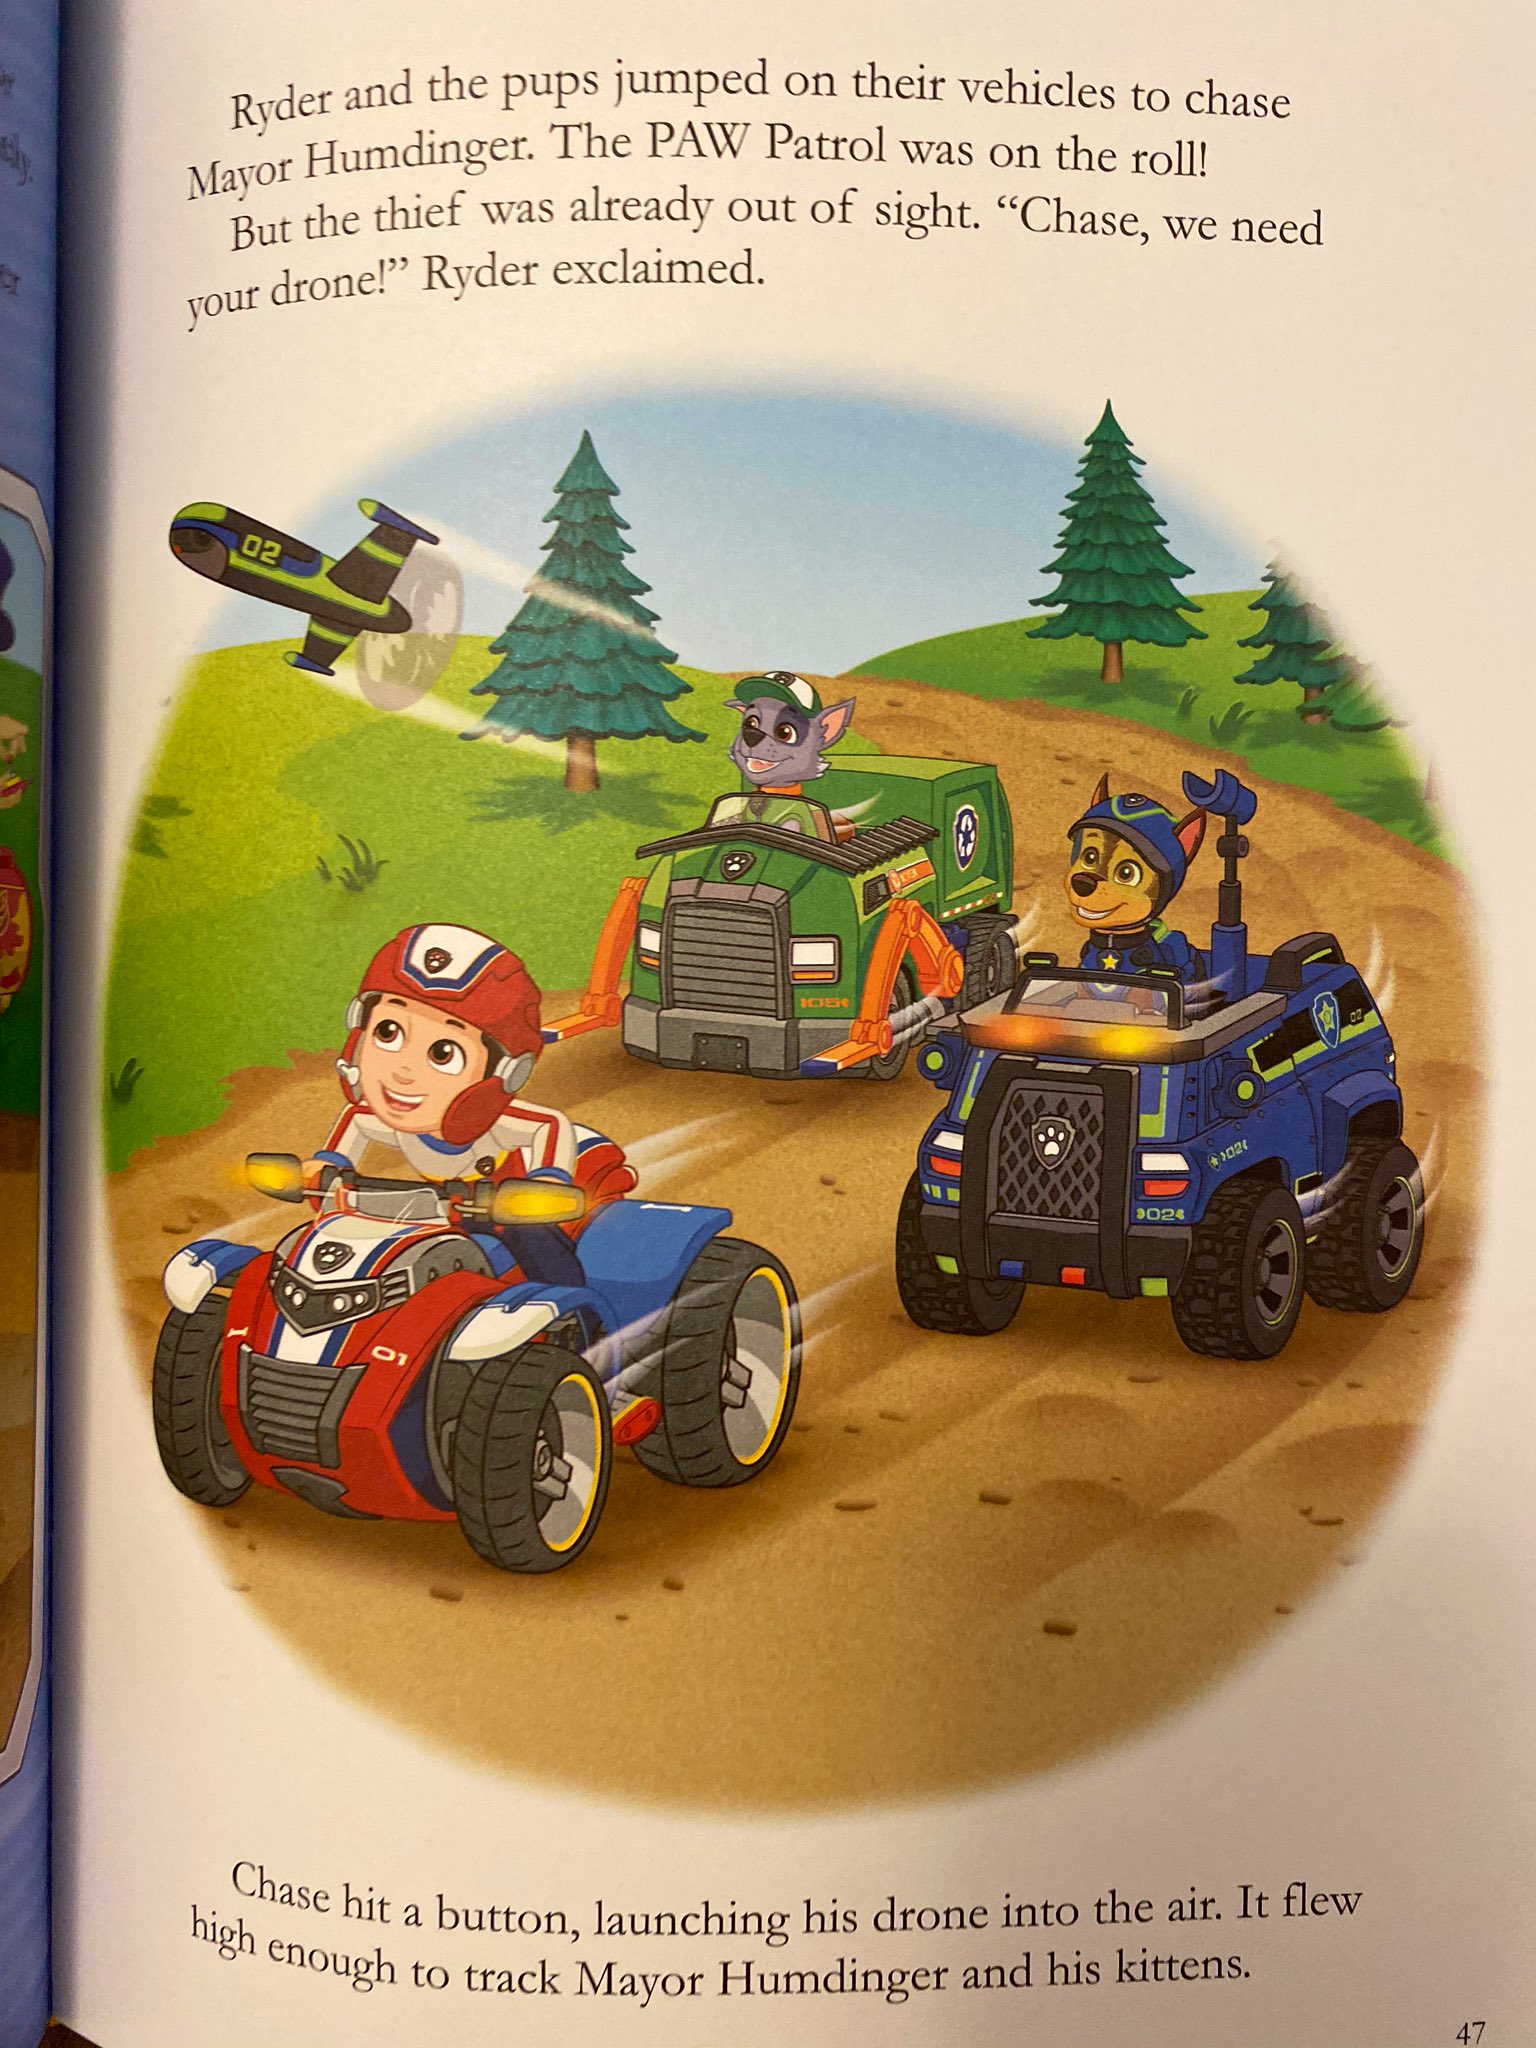 analyse demonstration diskret Zach Seward on Twitter: "The Paw Patrol have a military-style drone for  tracking bad guys, great. https://t.co/daiBkLFxlU" / Twitter